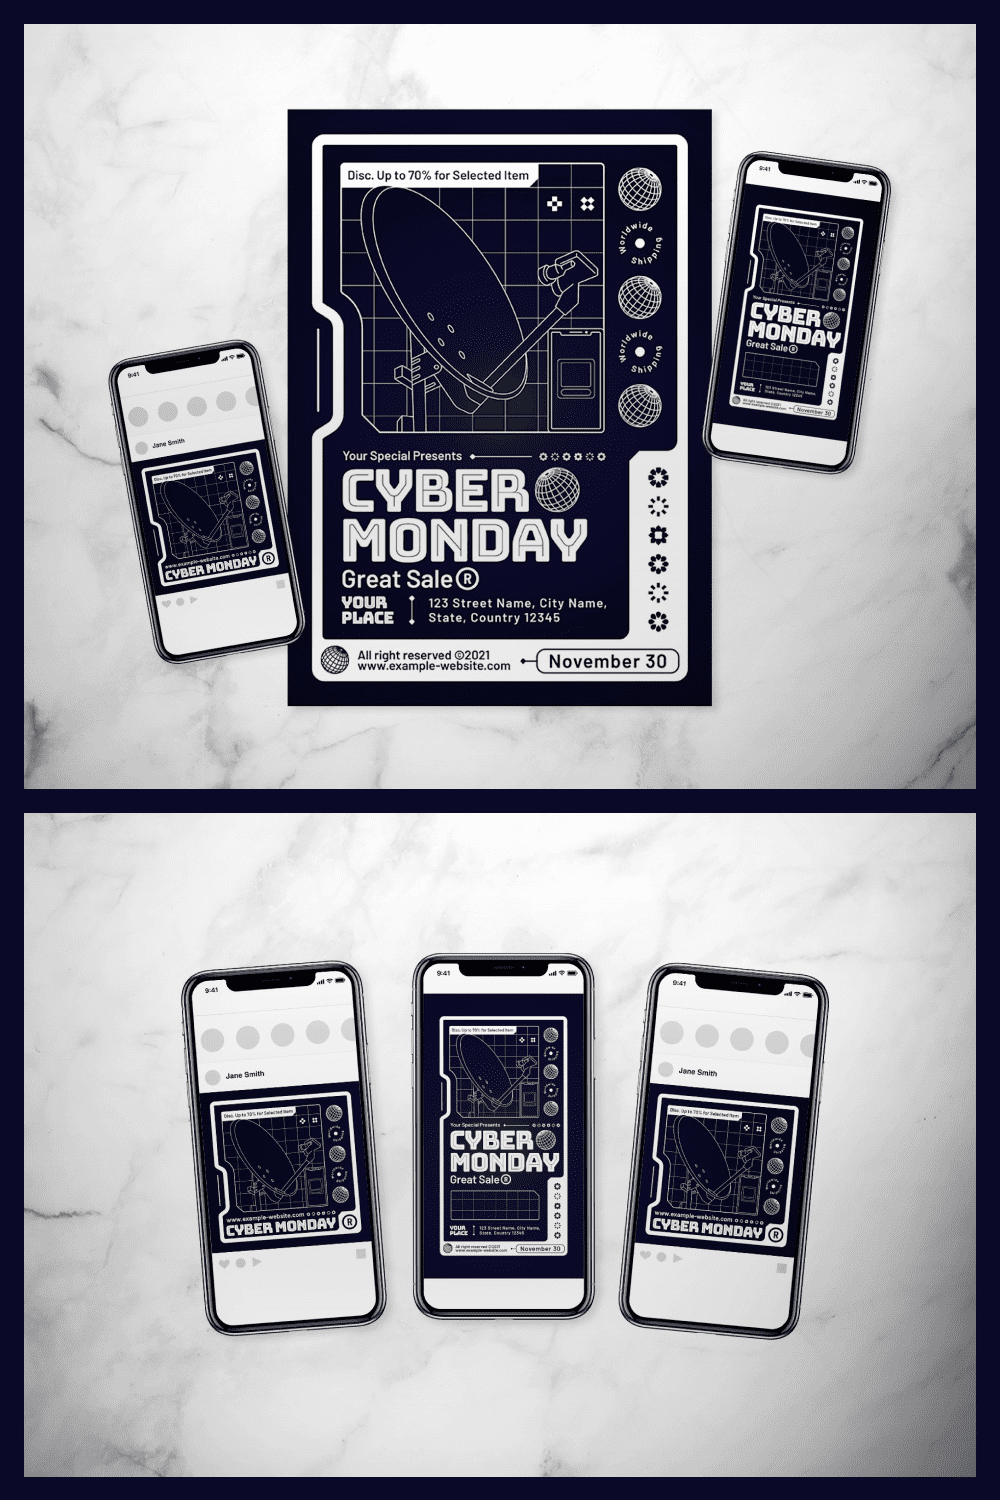 Cyber Monday Flyers and Instagram Post Templates on Dark Blue Background with White Letters.